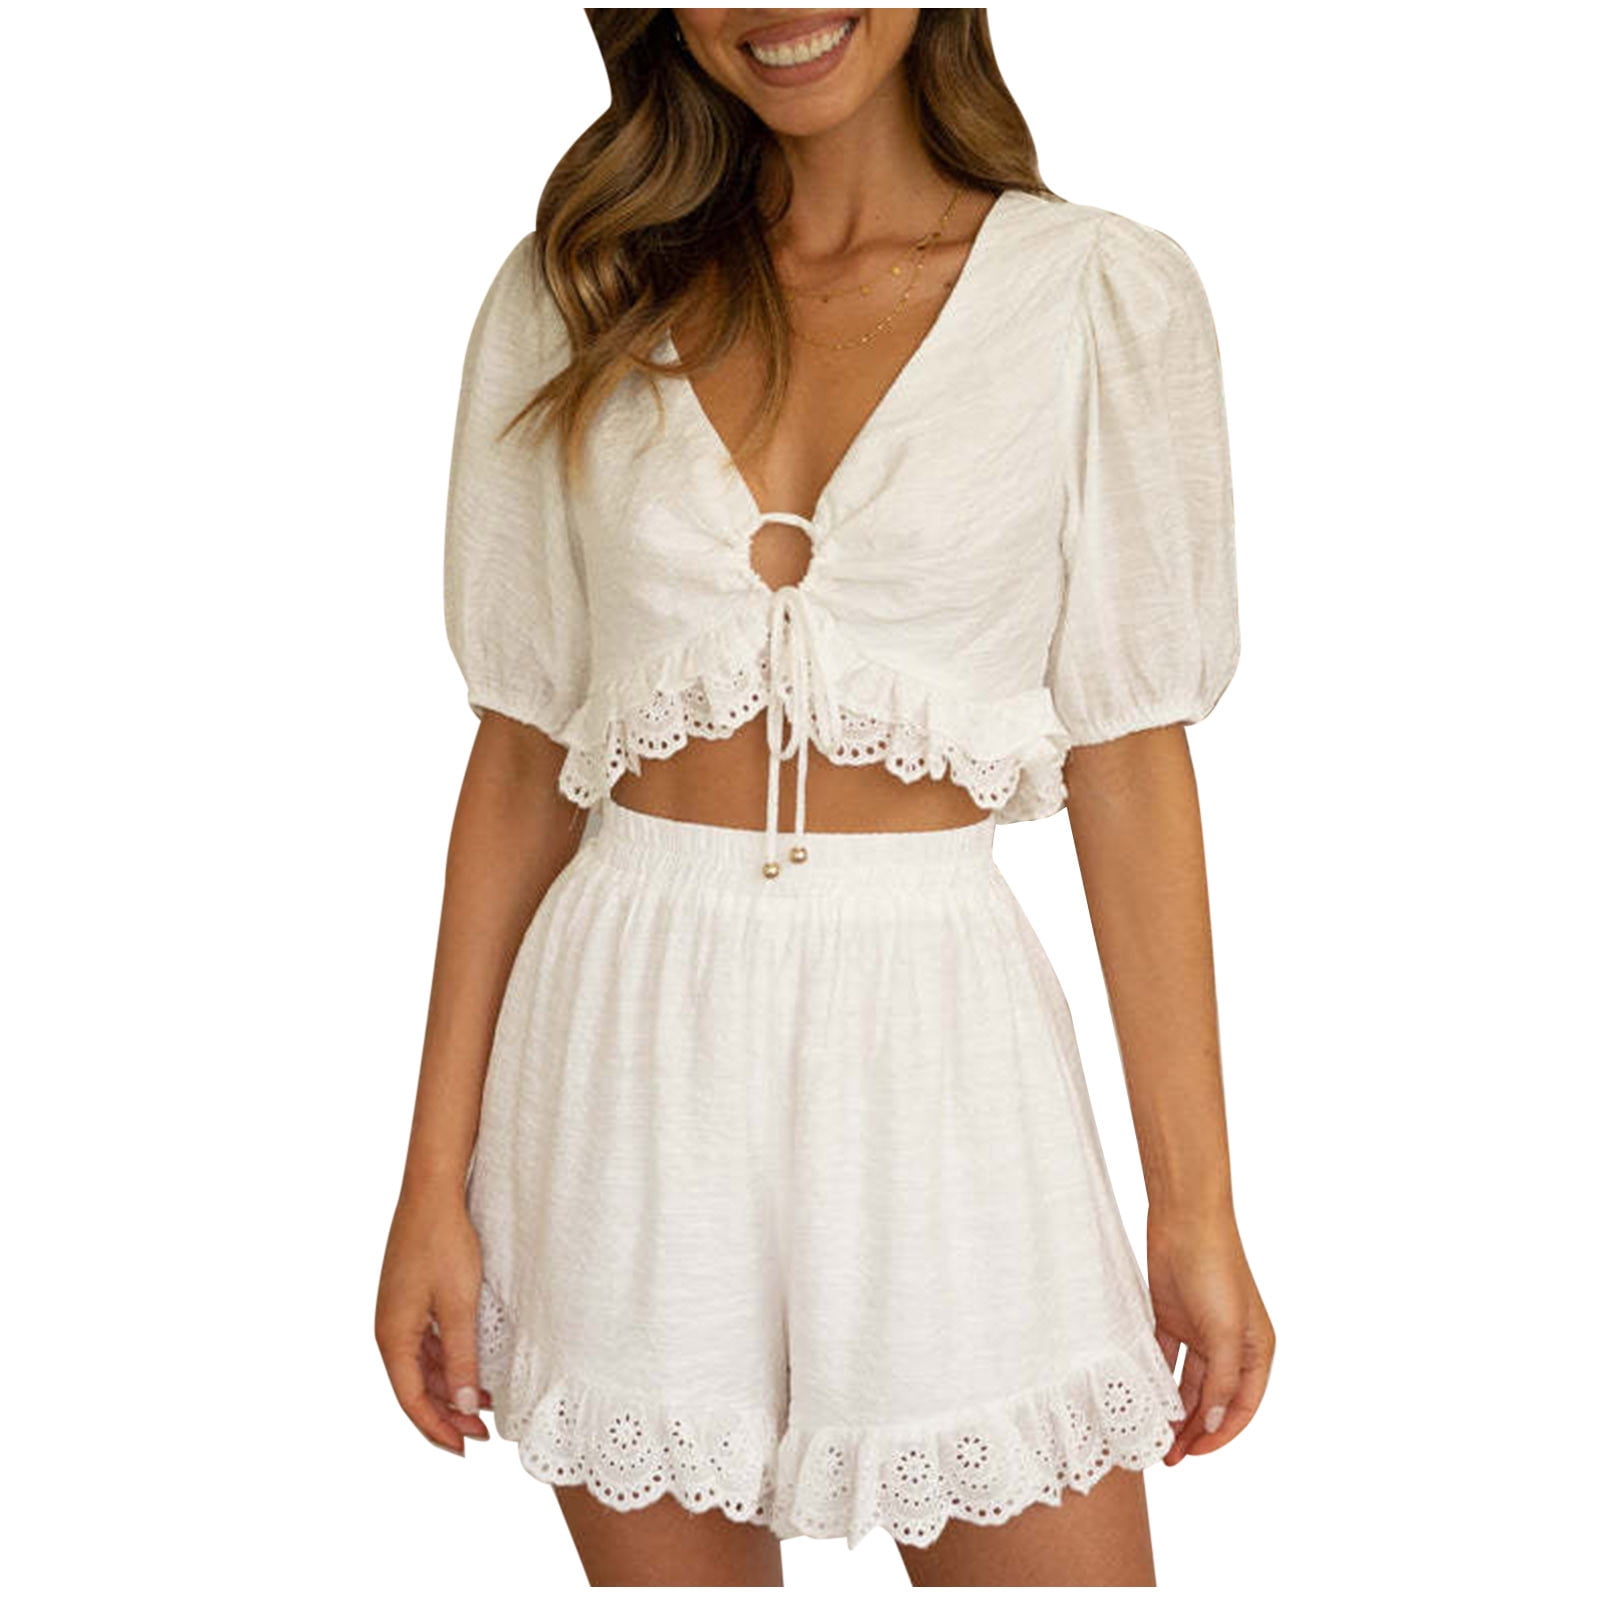 REORIAFEE Active Wear Outfits for Women Going out Outfits Women s Spring Summer Round Neck Ruffle Short Sleeve Shorts Casual Suit White M 84065f4c 380f 4b74 b19e 043425449497.683fbb210778f3d26fc8a54ea3c484ff